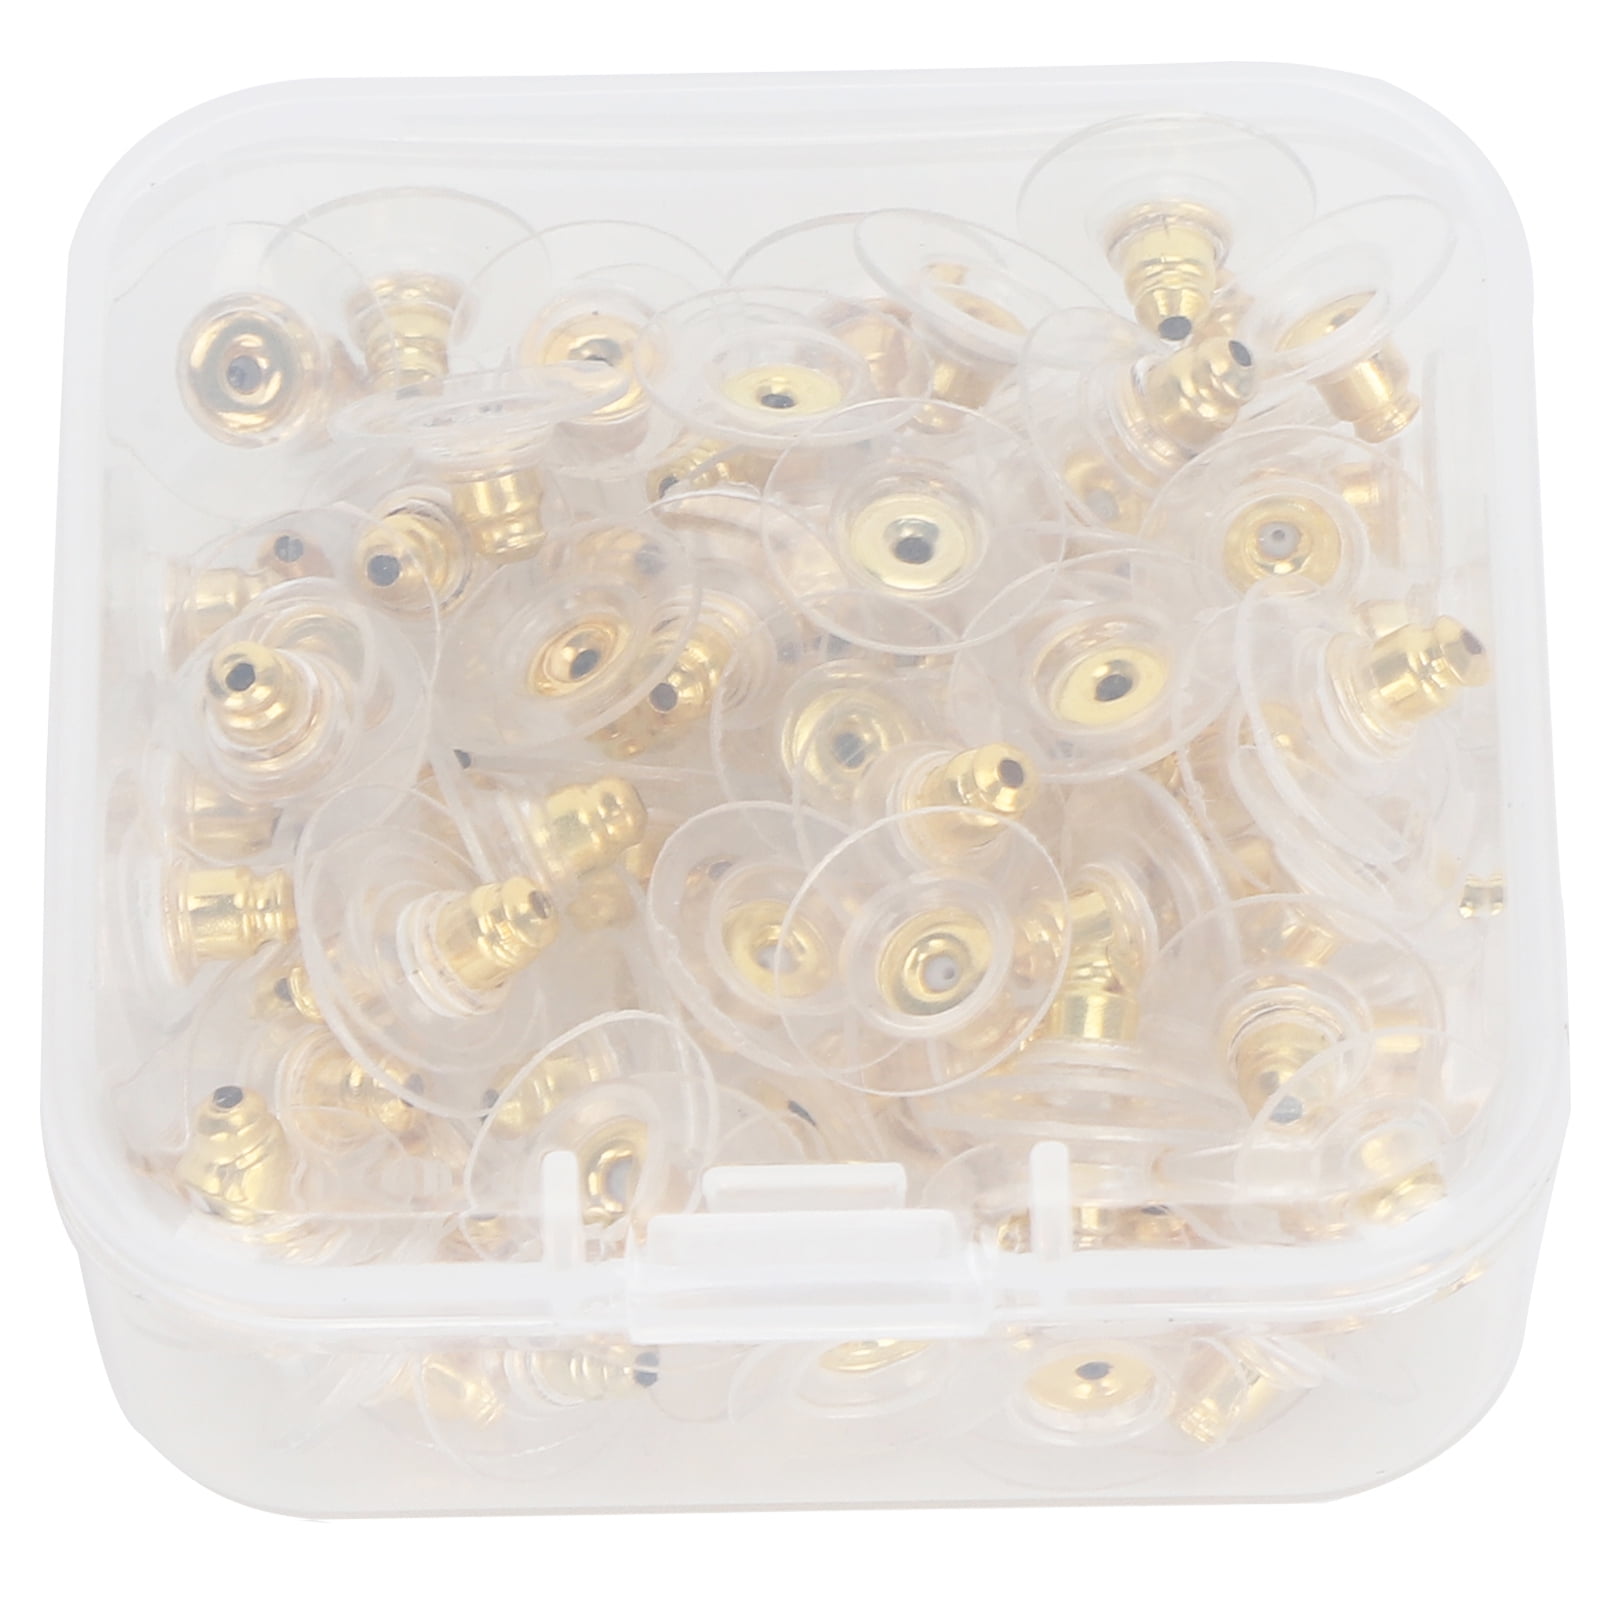 100Pcs Earring Backs Replace Pierced Backing Stopper Boxed DIY Jewelry Materials 